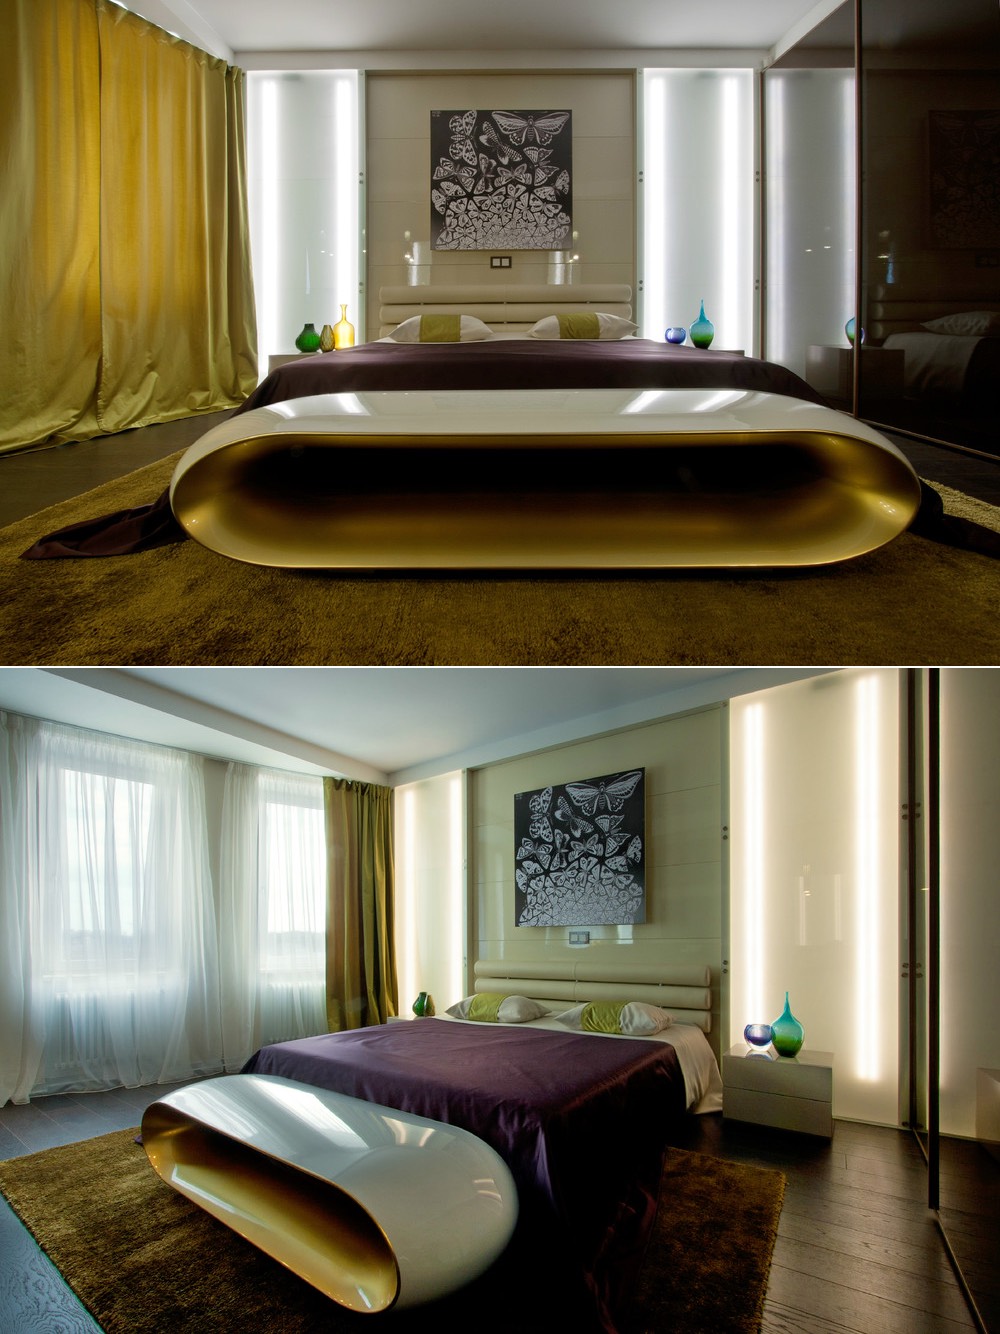 contemporary bedroom design "width =" 1000 "height =" 1334 "srcset =" https://mileray.com/wp-content/uploads/2020/05/1588509126_395_Take-a-Look-For-Luxury-Bedroom-Designs-With-Perfect-Organization.jpg 1000w, https://mileray.com/ wp -content / uploads / 2016/10 / Alexei-Denisov-225x300.jpg 225w, https://mileray.com/wp-content/uploads/2016/10/Alexei-Denisov-768x1024.jpg 768w, https: // myfashionos .com / wp-content / uploads / 2016/10 / Alexei-Denisov-696x928.jpg 696w, https://mileray.com/wp-content/uploads/2016/10/Alexei-Denisov-315x420.jpg 315w "sizes = "(maximum width: 1000px) 100vw, 1000px